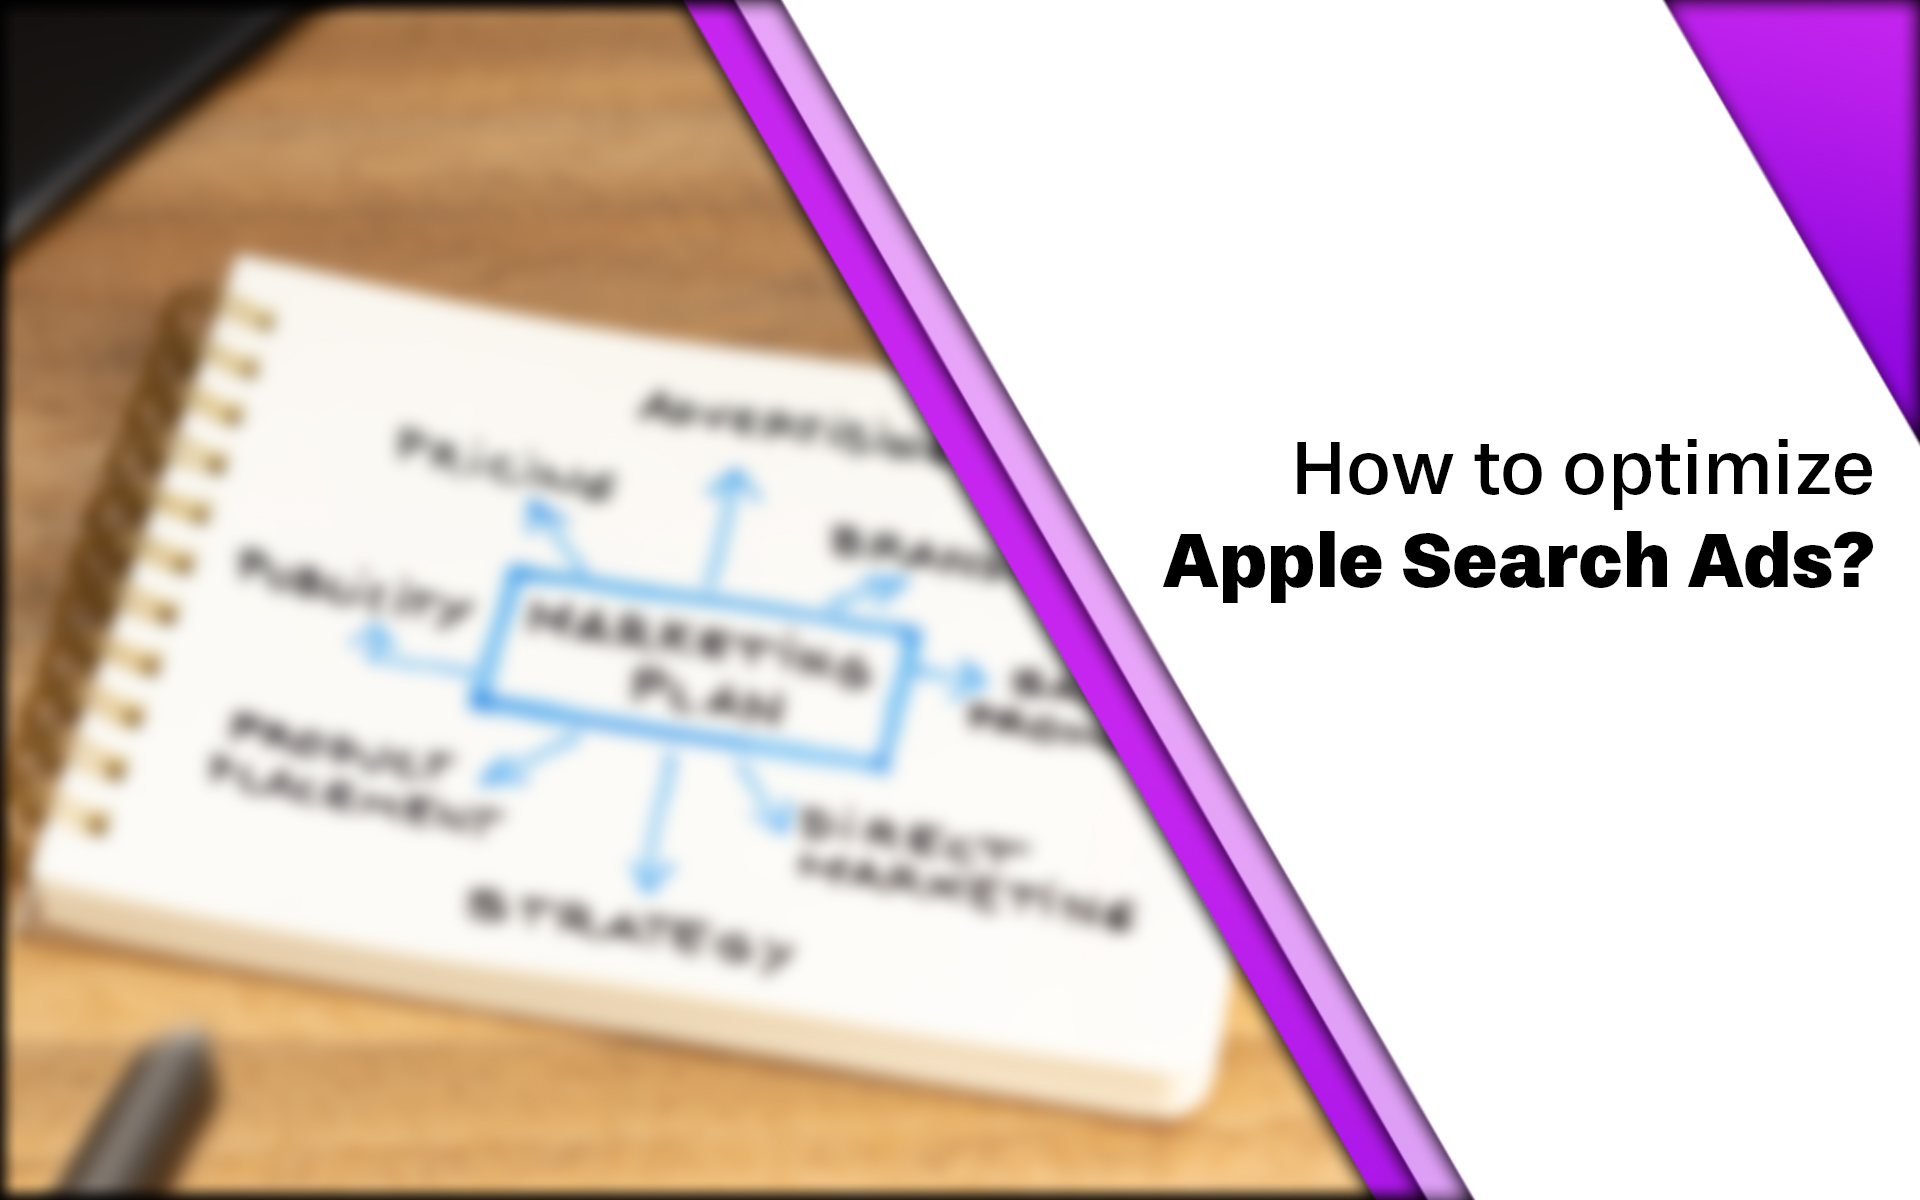 How to optimize Apple Search Ads - a quick guide